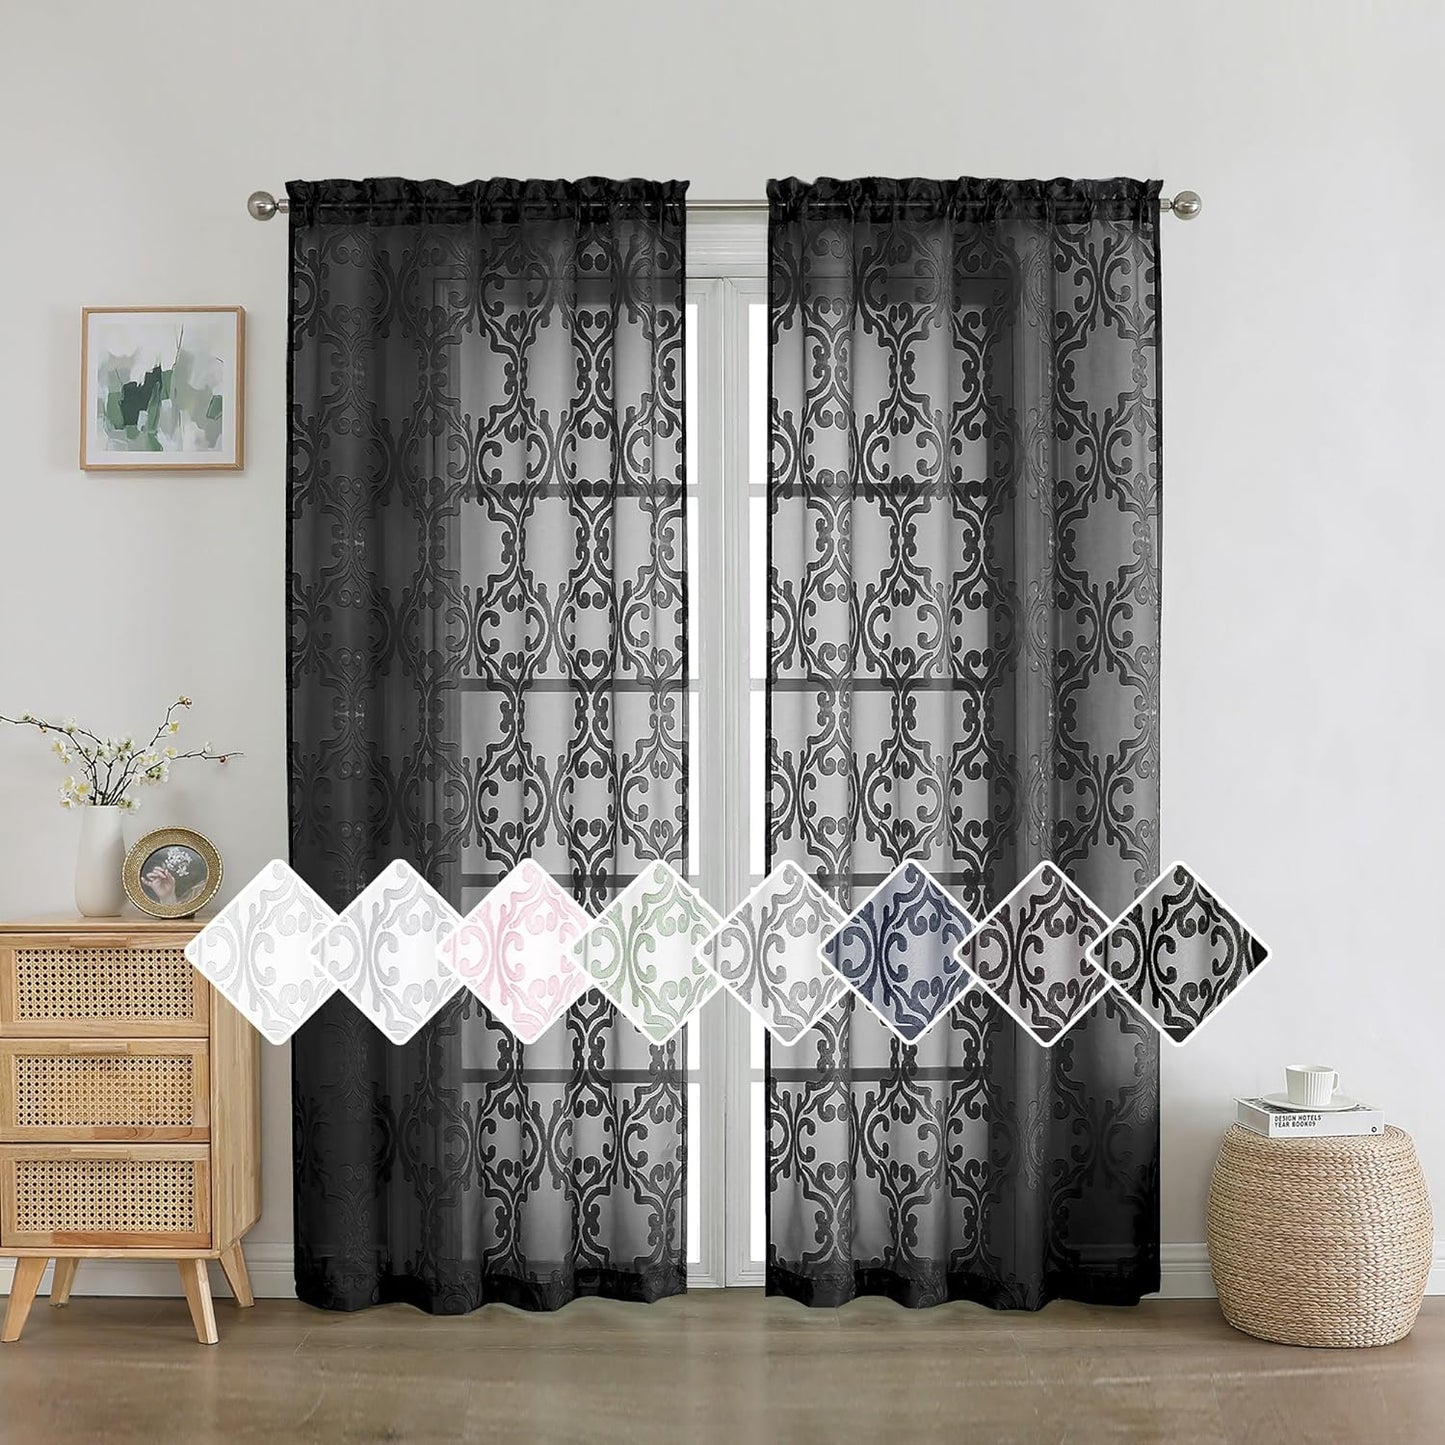 Aiyufeng Suri 2 Panels Sheer Sage Green Curtains 63 Inches Long, Light & Airy Privacy Textured Sheer Drapes, Dual Rod Pocket Voile Clipped Floral Luxury Panels for Bedroom Living Room, 42 X 63 Inch  Aiyufeng Black 2X42X72" 